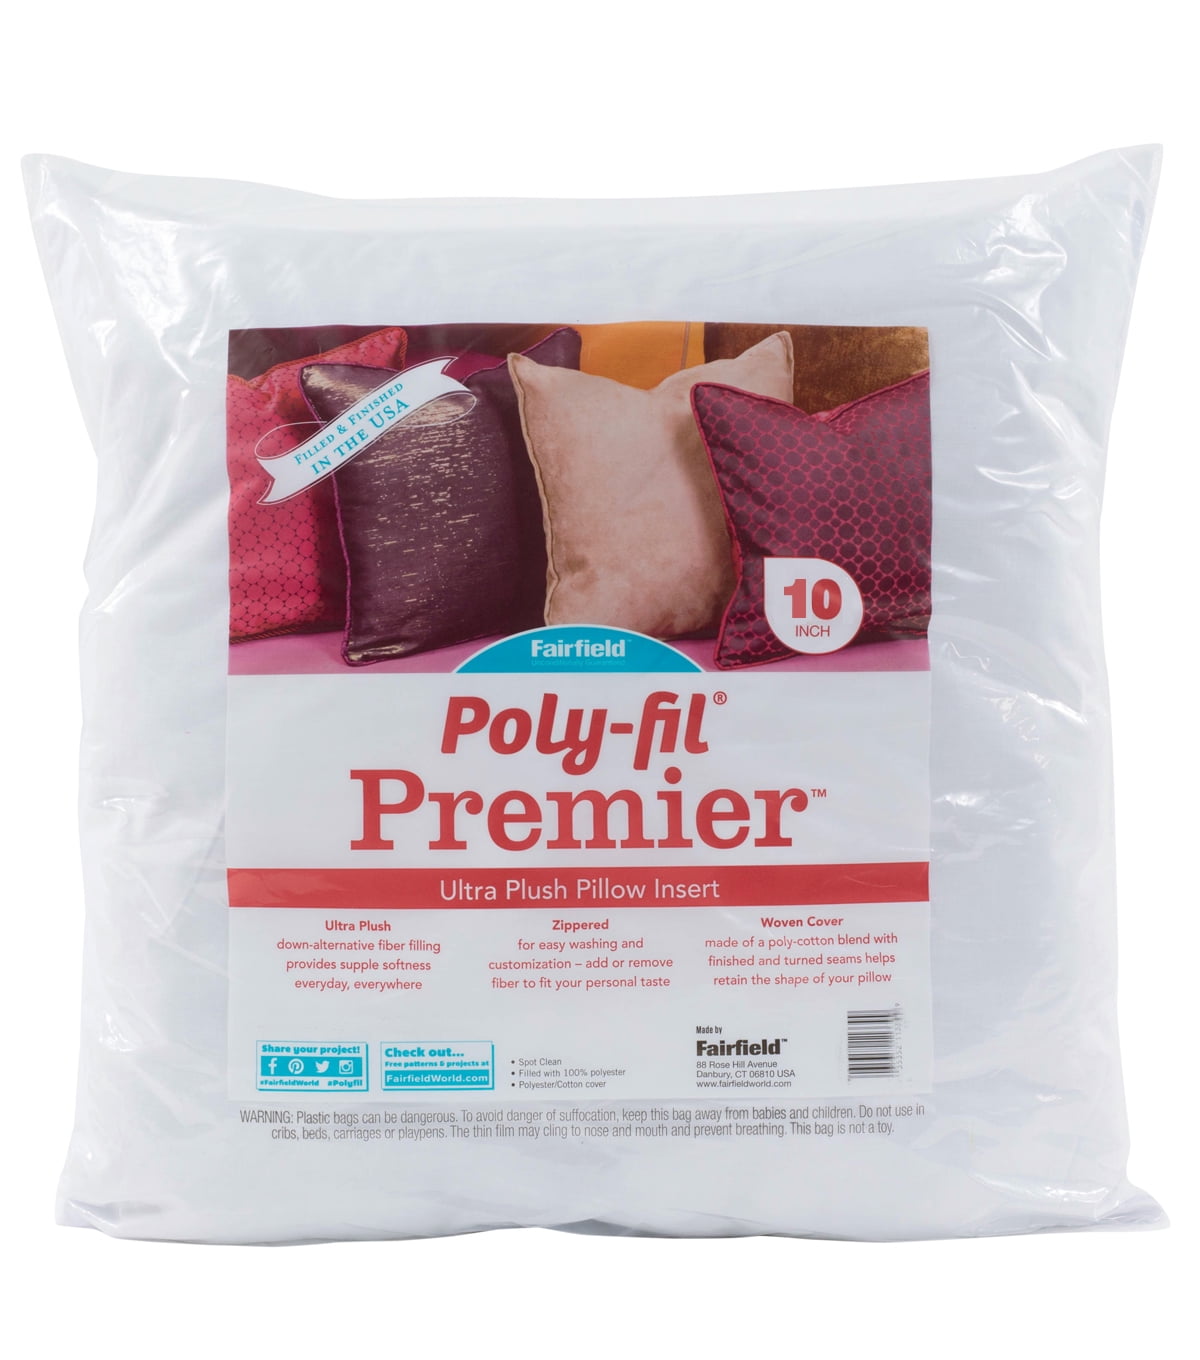 Polyfil Stuffing Polyester Fiber Pillow, Stuff Filling for Craft Washable  50oz